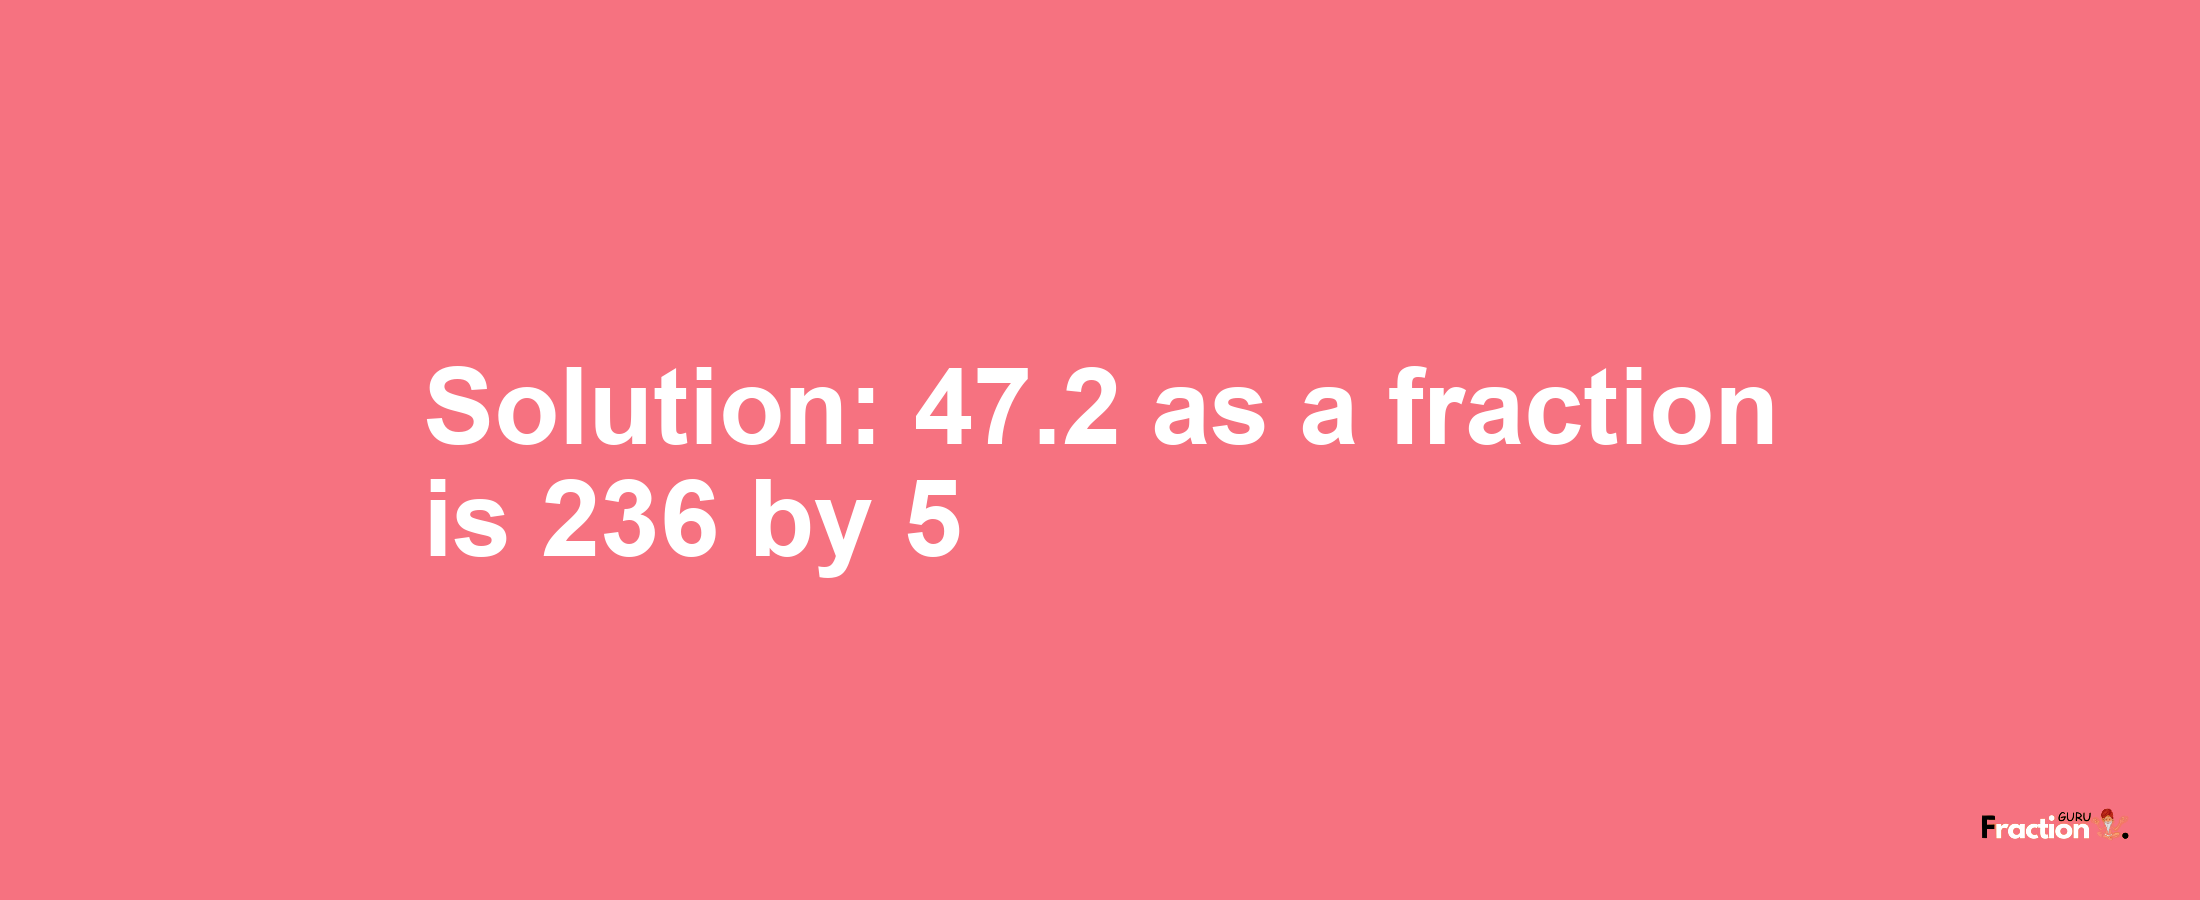 Solution:47.2 as a fraction is 236/5